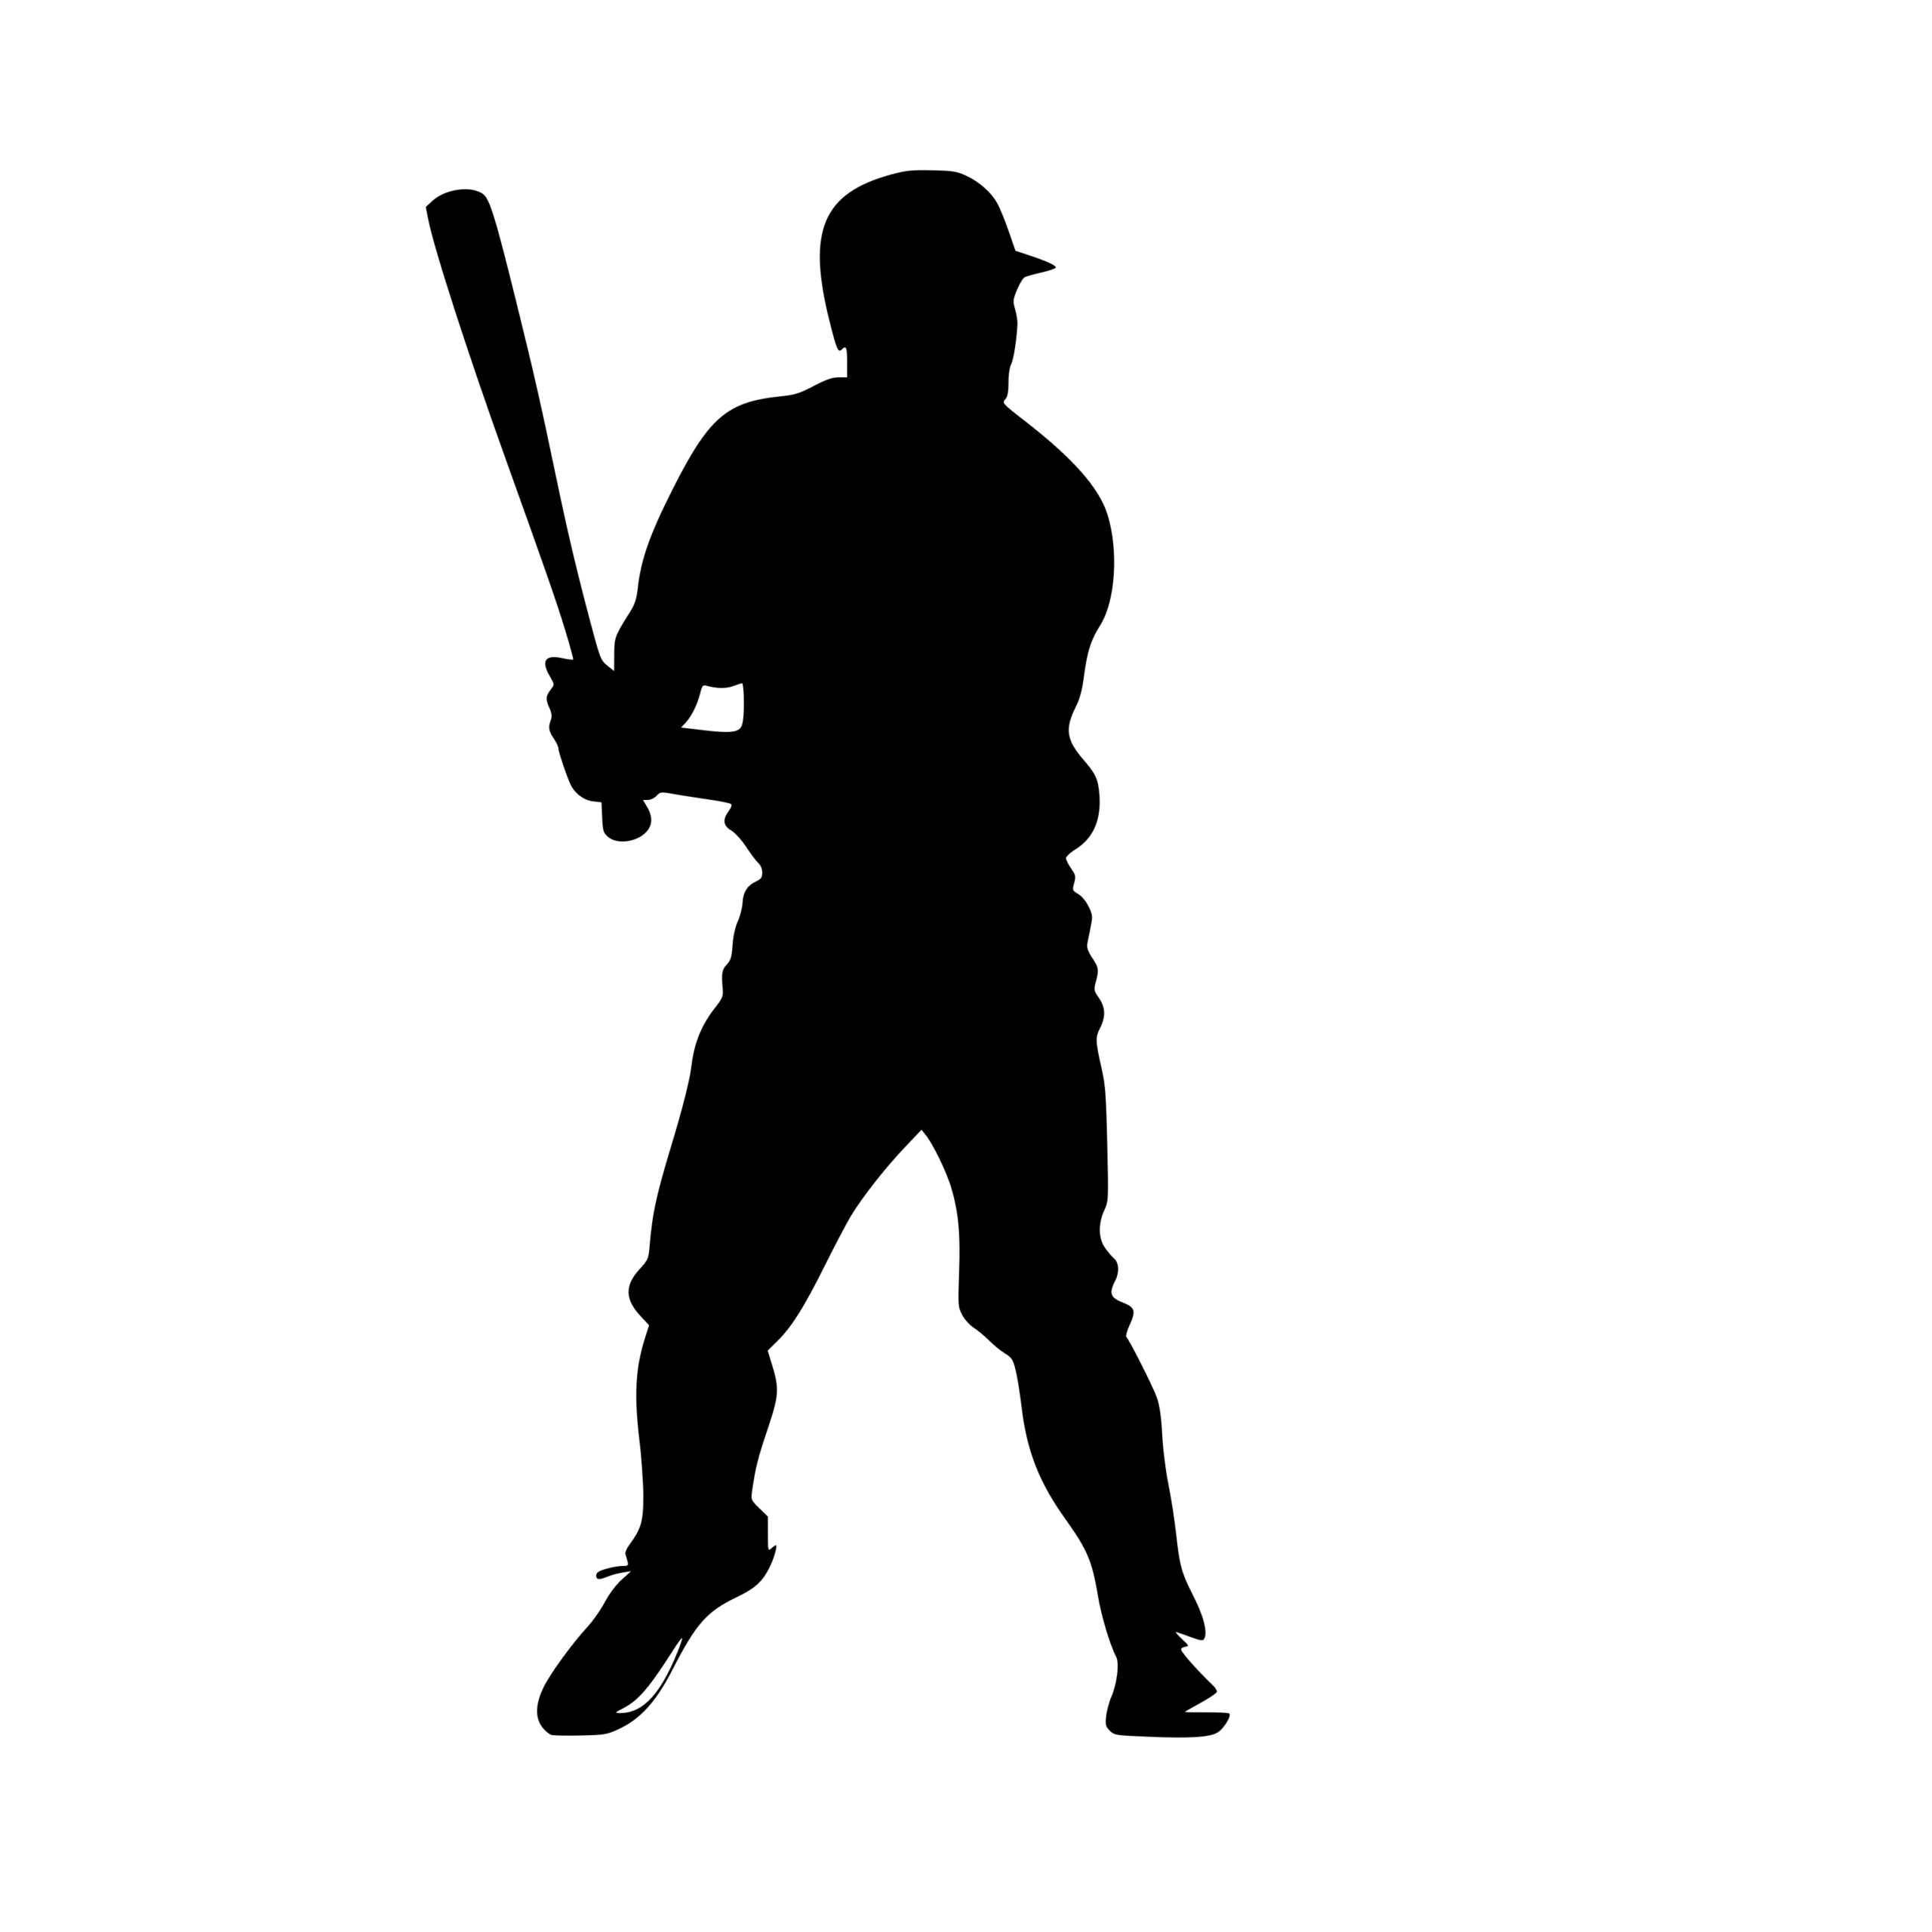 Baseball Batter SVG File for Cricut, Silhouette, and Laser Machines